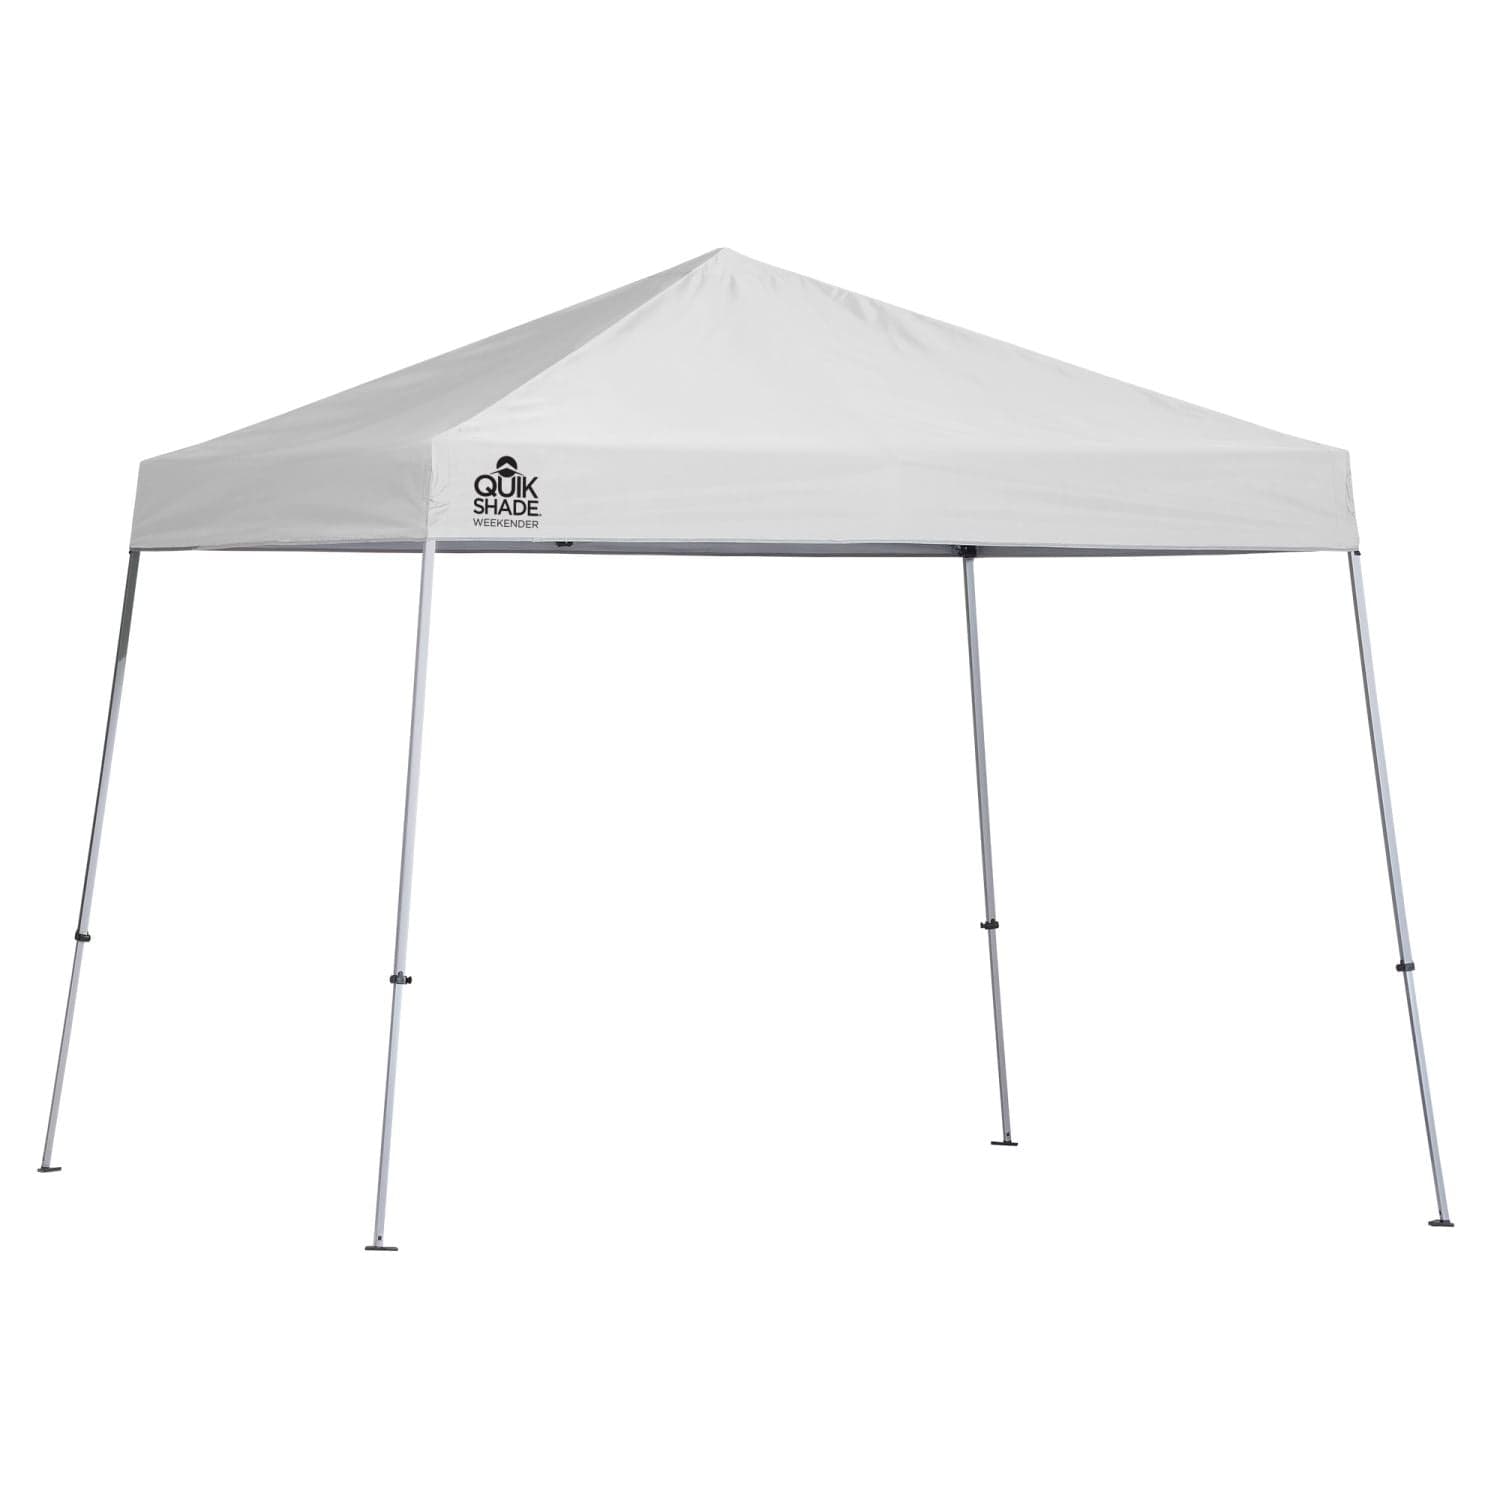 The Fulfiller Pop Up Canopies Quik Shade | Weekender Elite WE81 12' x 12' Slant Leg Canopy - White 167514DS